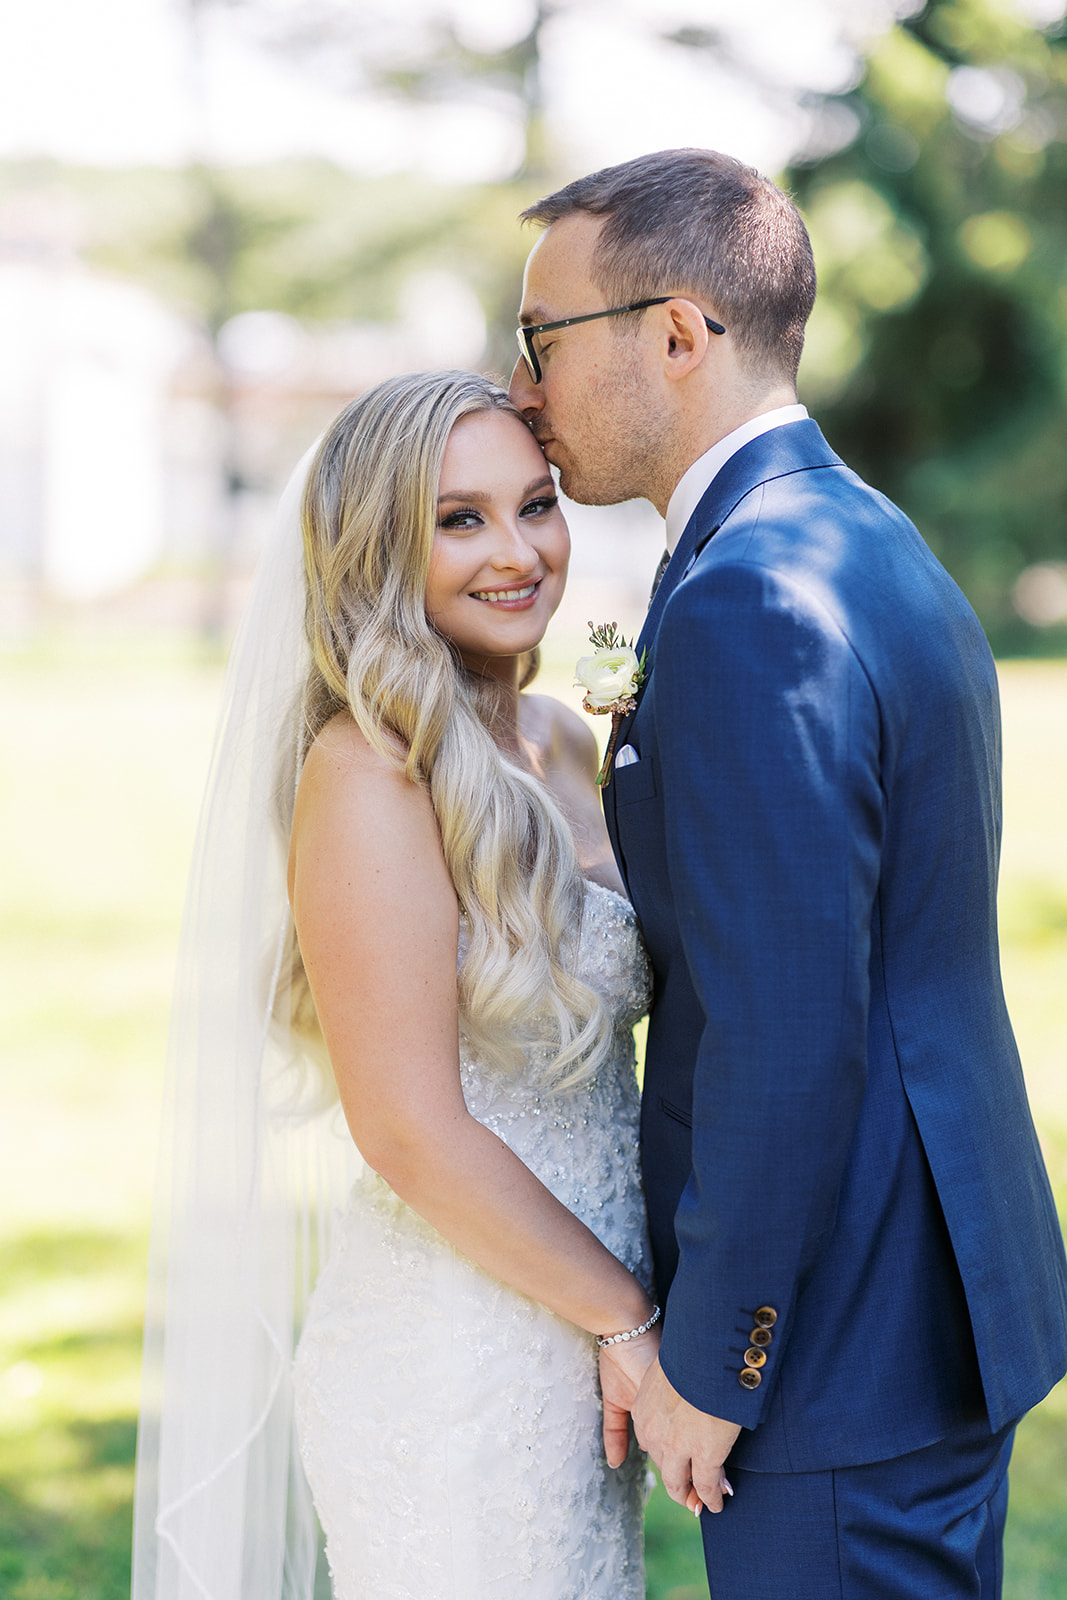 A groom in a blue suit kisses the forehead of his bride while standing in a lawn